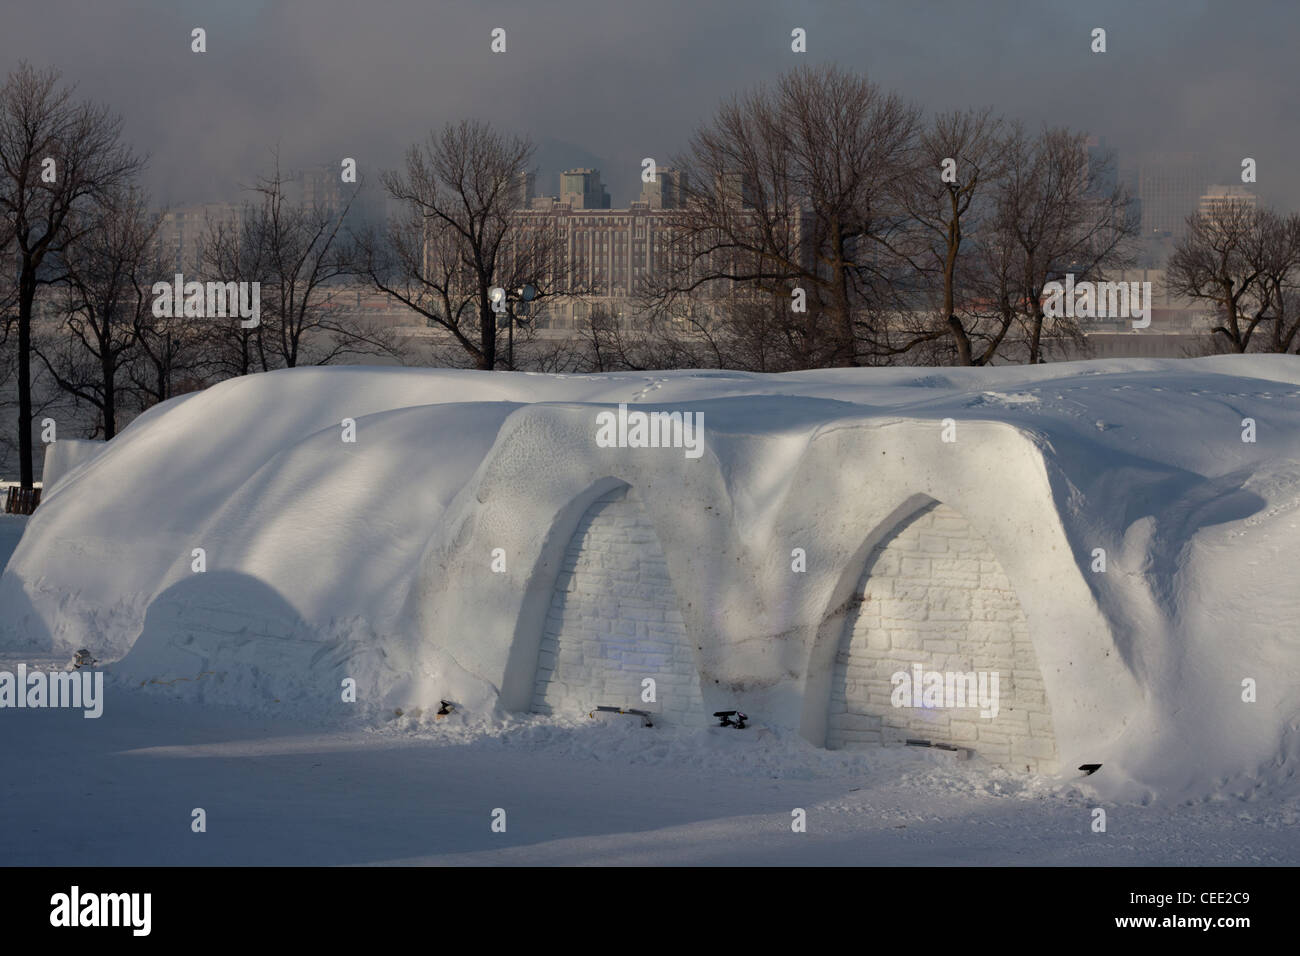 Snow shelter in ice hotel in Montreal Stock Photo